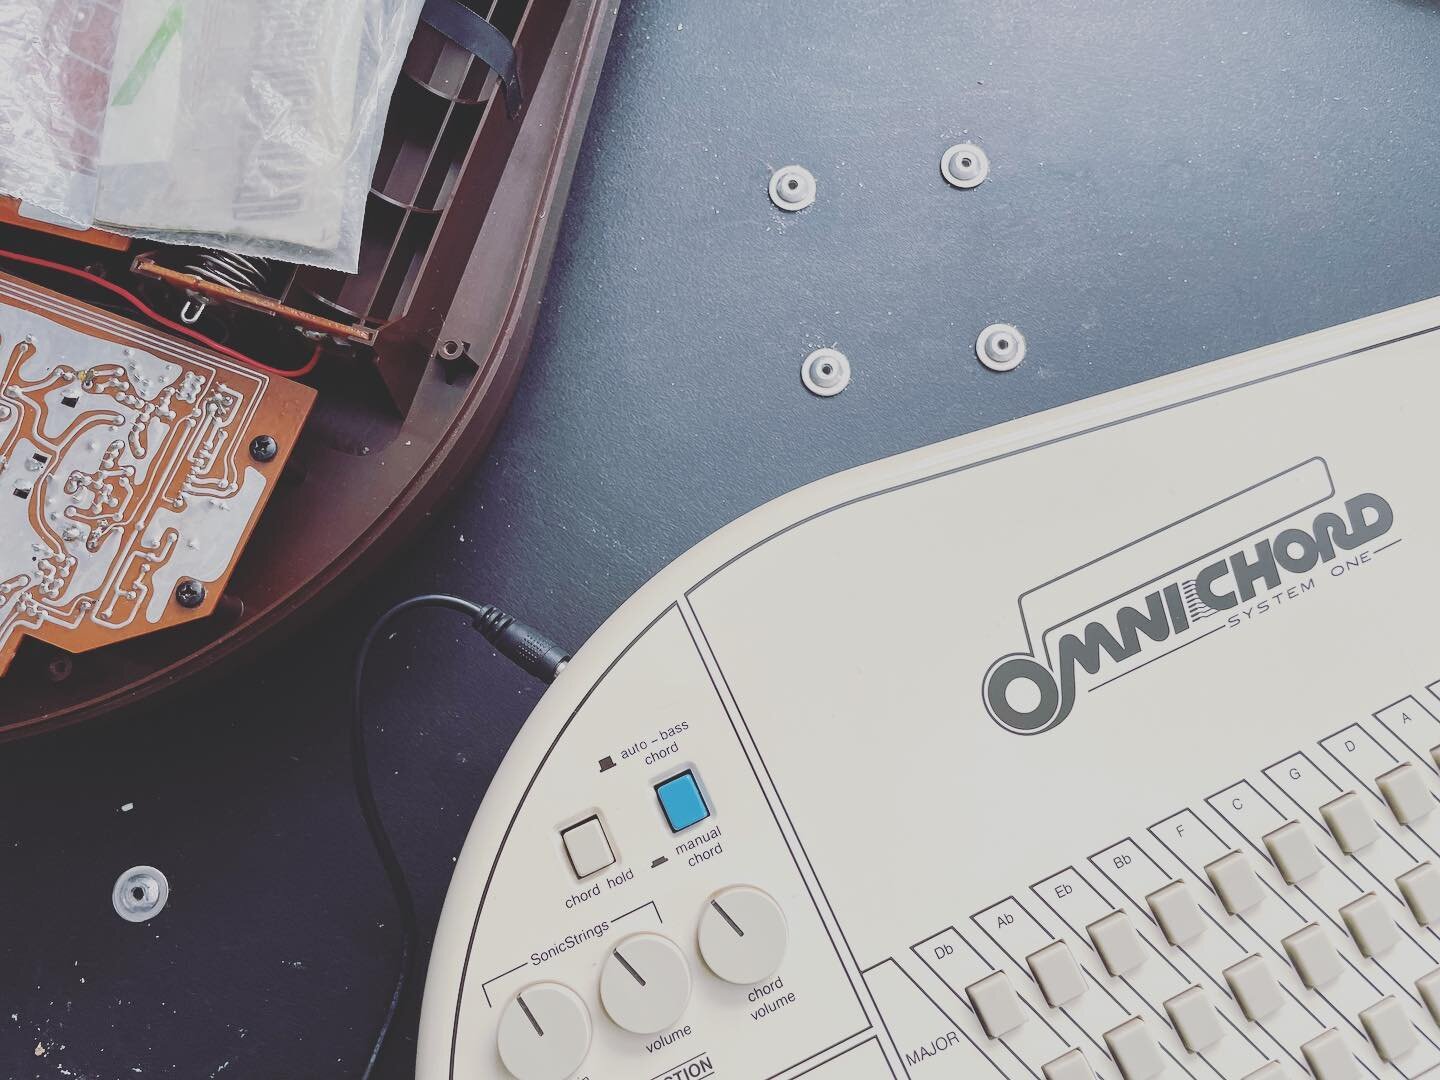 New #Omnichord smut online for your purchasing pleasure. Just in time for the Christmas season!
Visit our website to purchase.

ALSO OF NOTE: All purchases of &ldquo;A Very Omnichord Christmas Again / An Omnichord for Christmas&rdquo; are 50% off wit